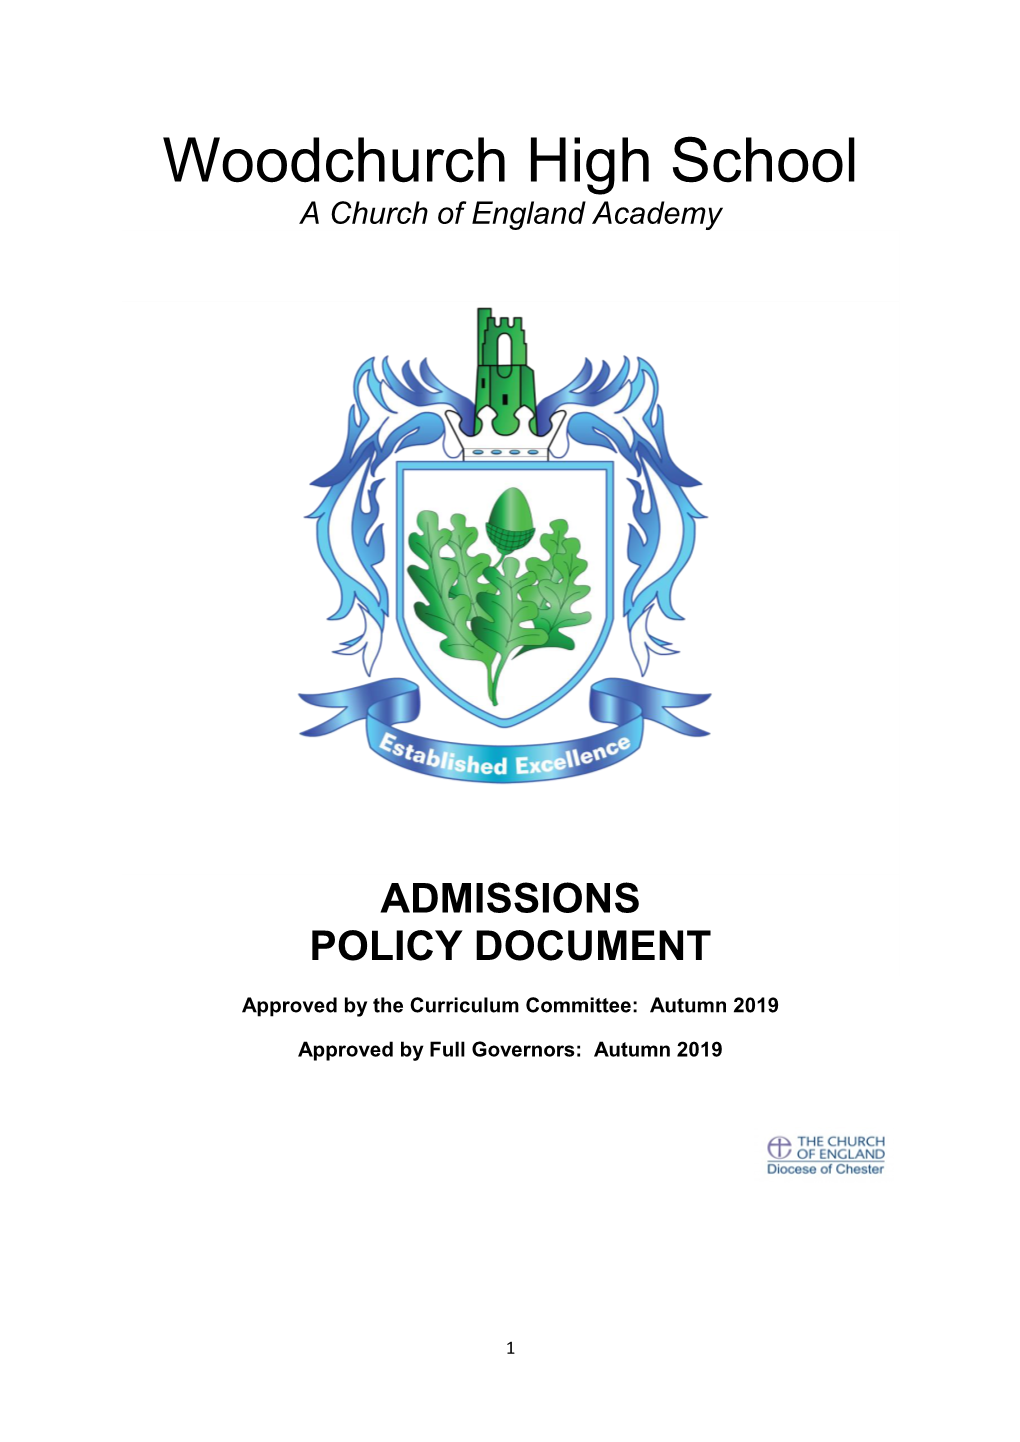 Admissions Policy (September 2021)